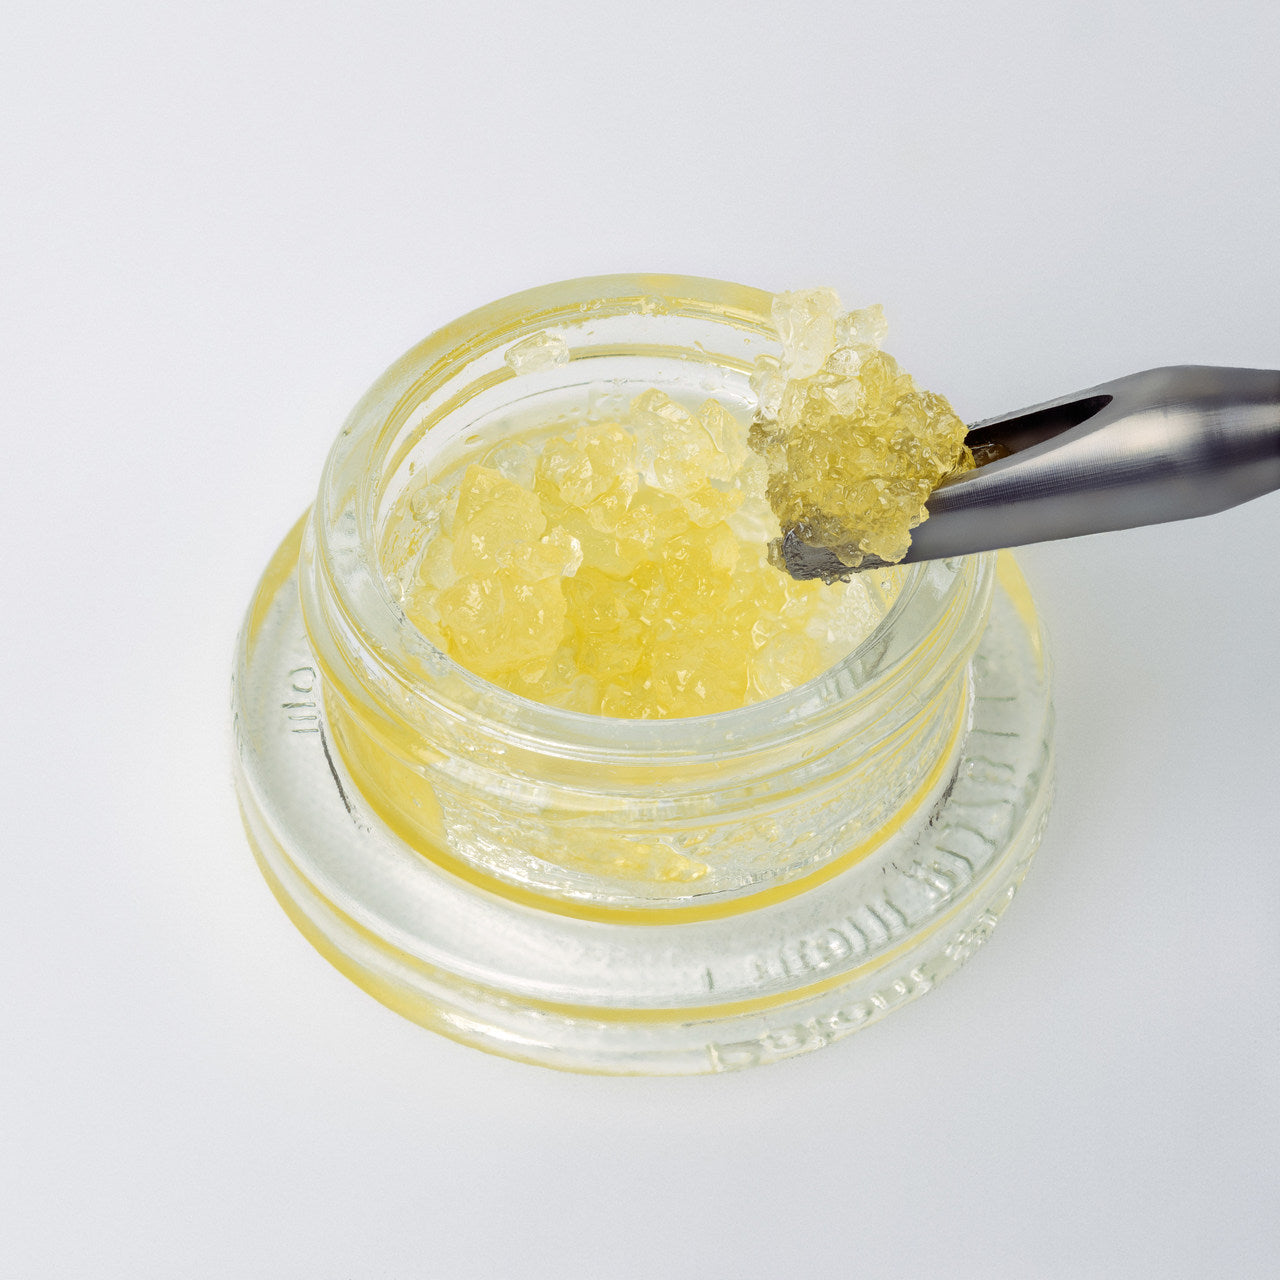 Live resin diamonds, a cannabis extract, are scooped out of their glass jar with a metal dabbing tool.